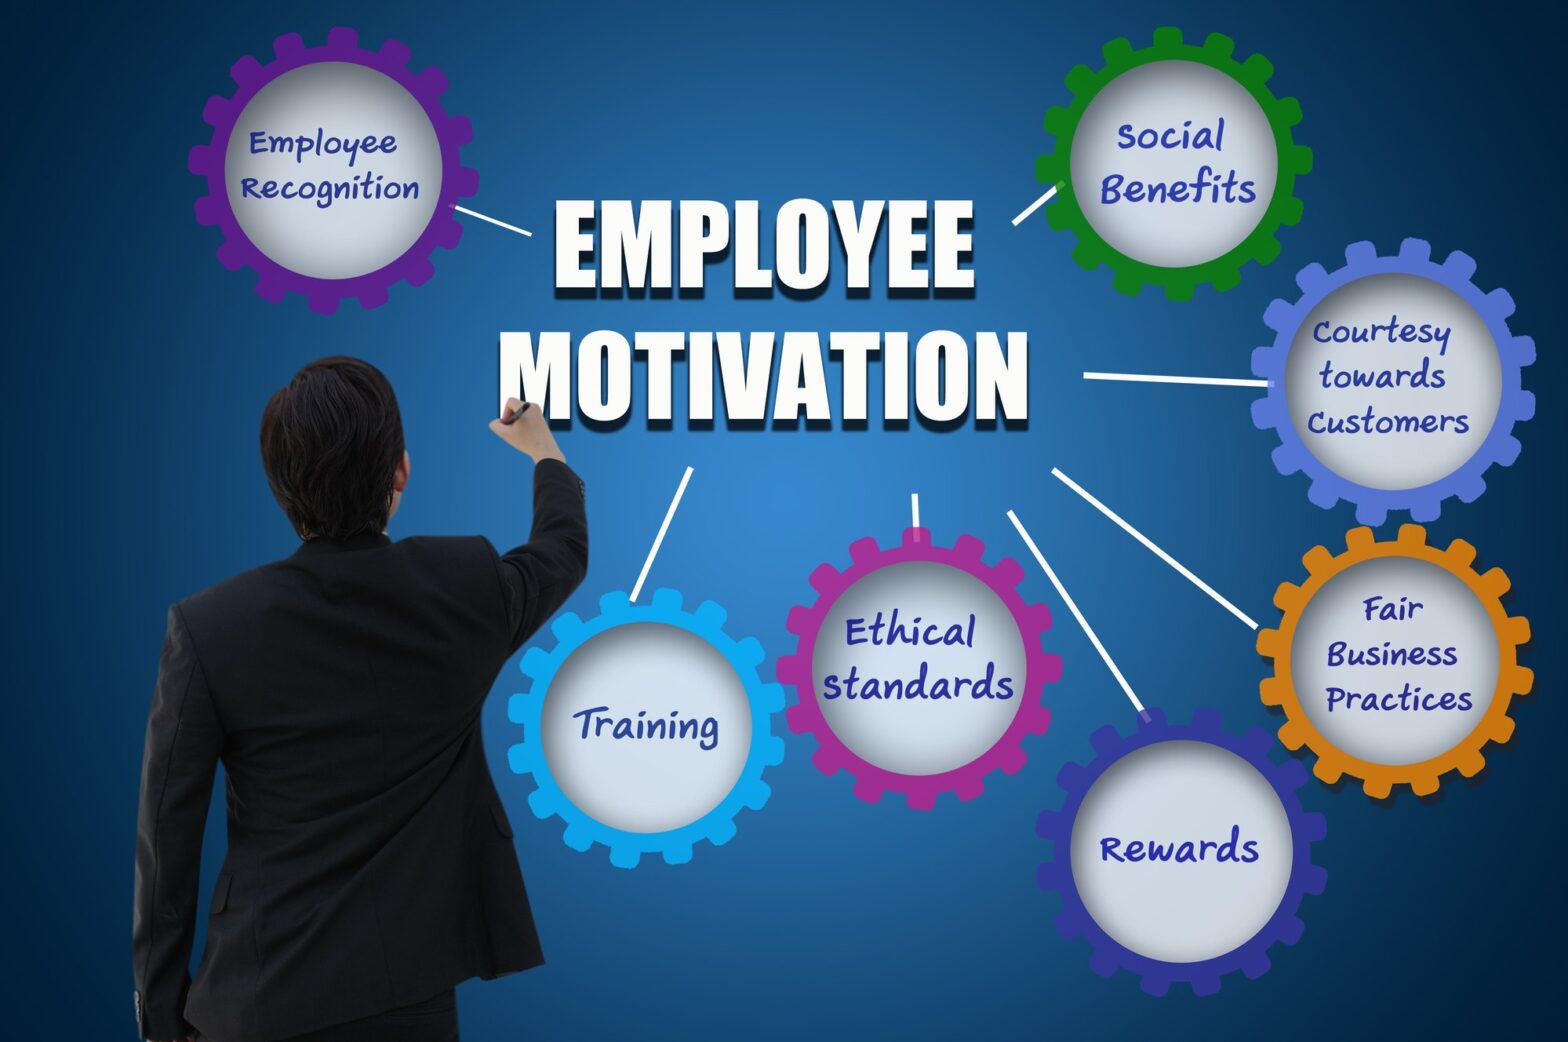 Employee Recognition Software Market